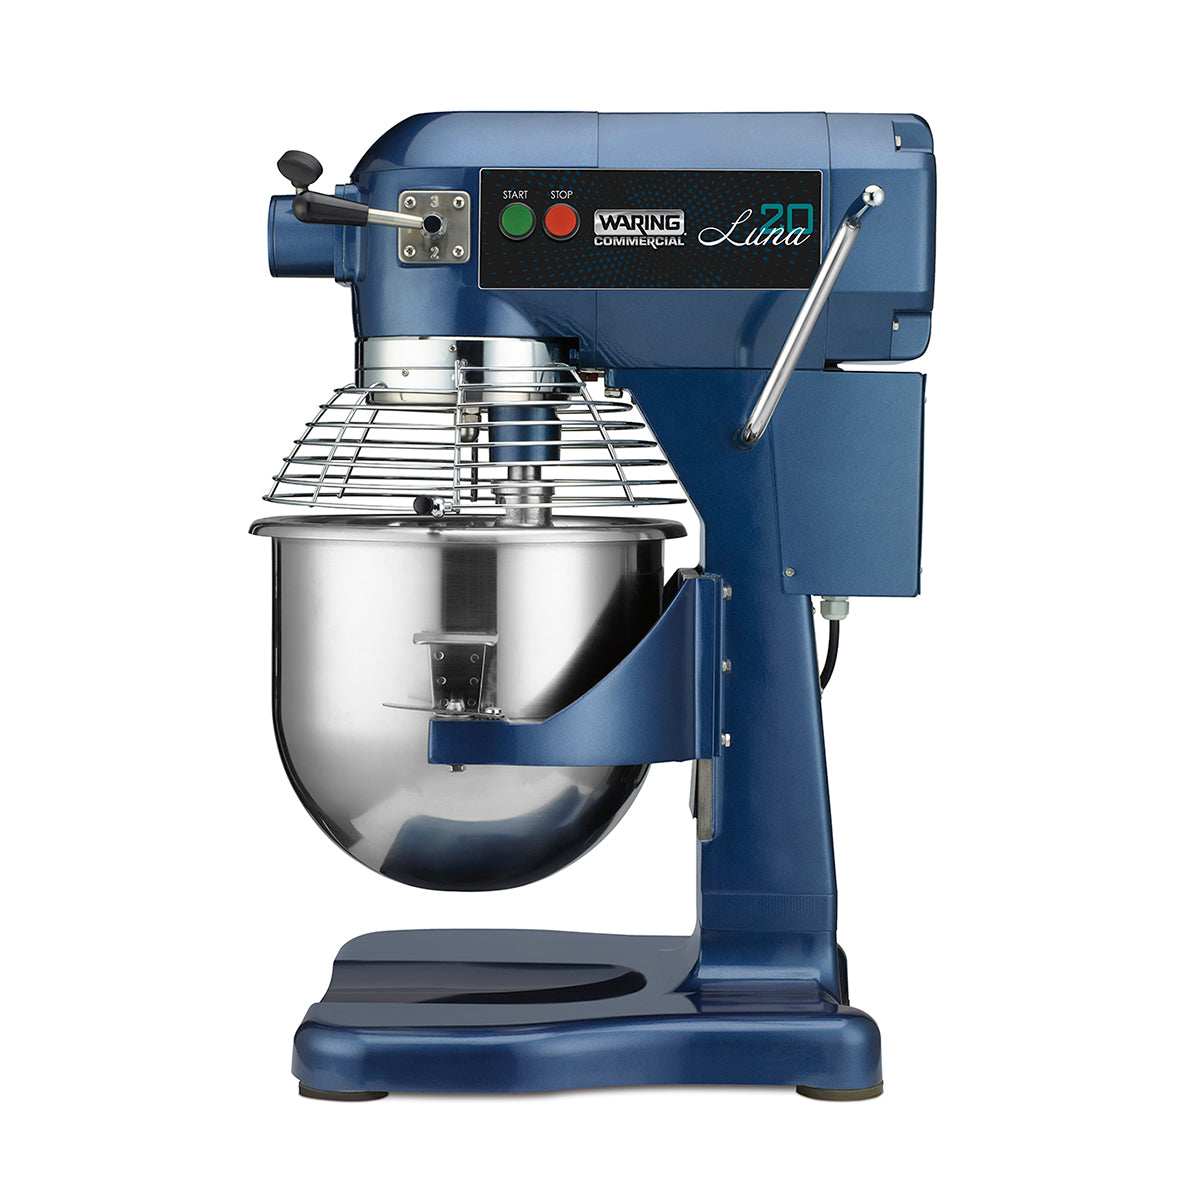 WSM20L "Luna Series" 20-Quart Planetary Mixer with Dough Hook, Mixing Paddle, & Whisk by Waring Commercial